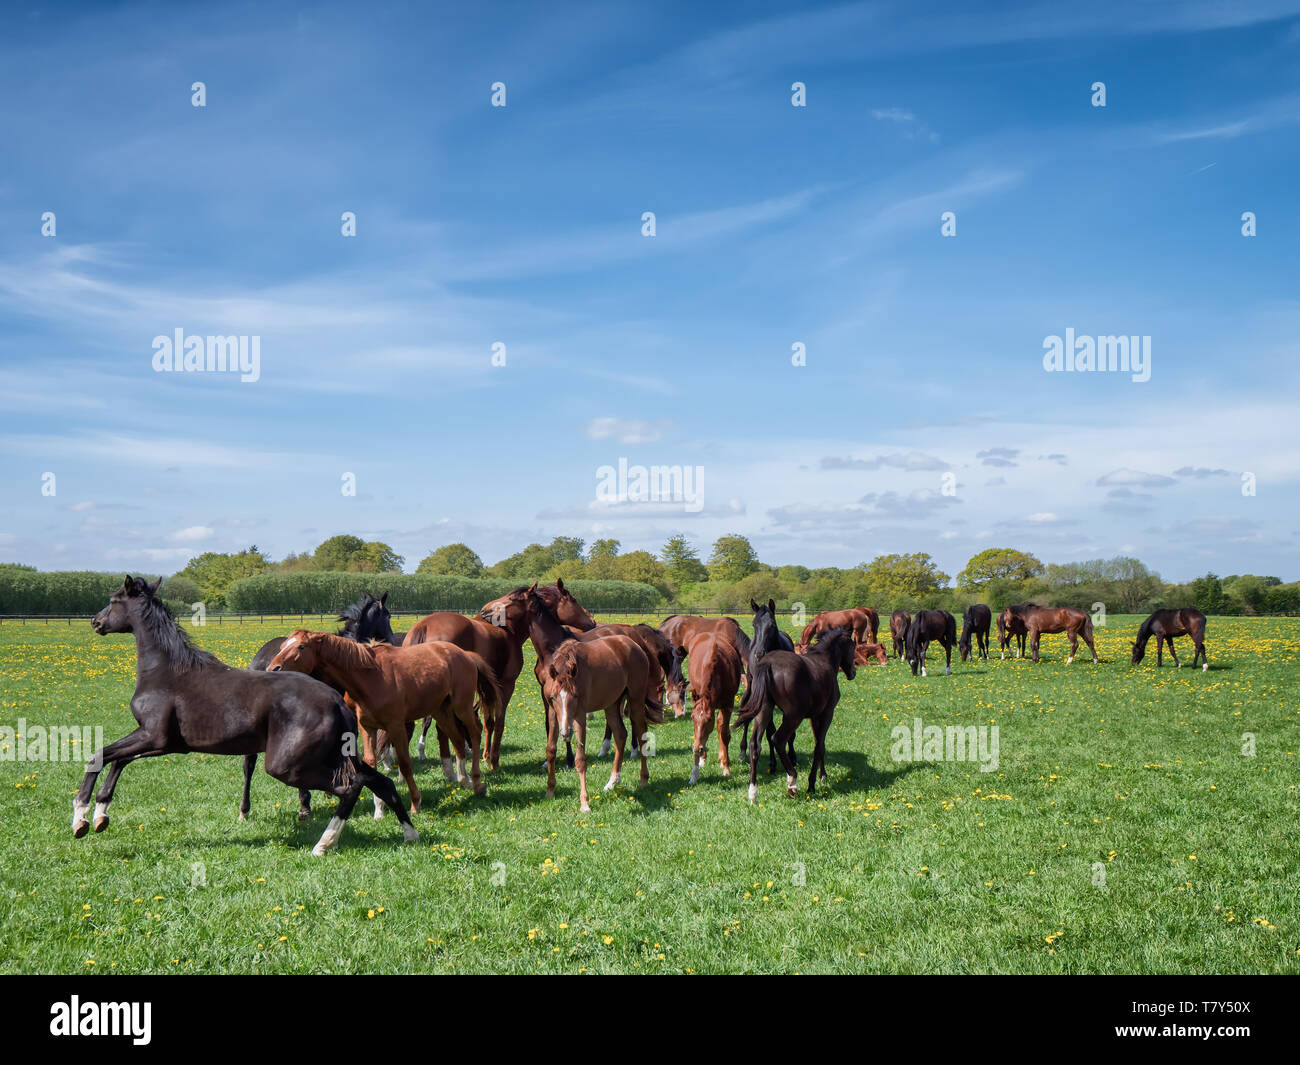 Horses and foals on a ranch in Denmark Stock Photo